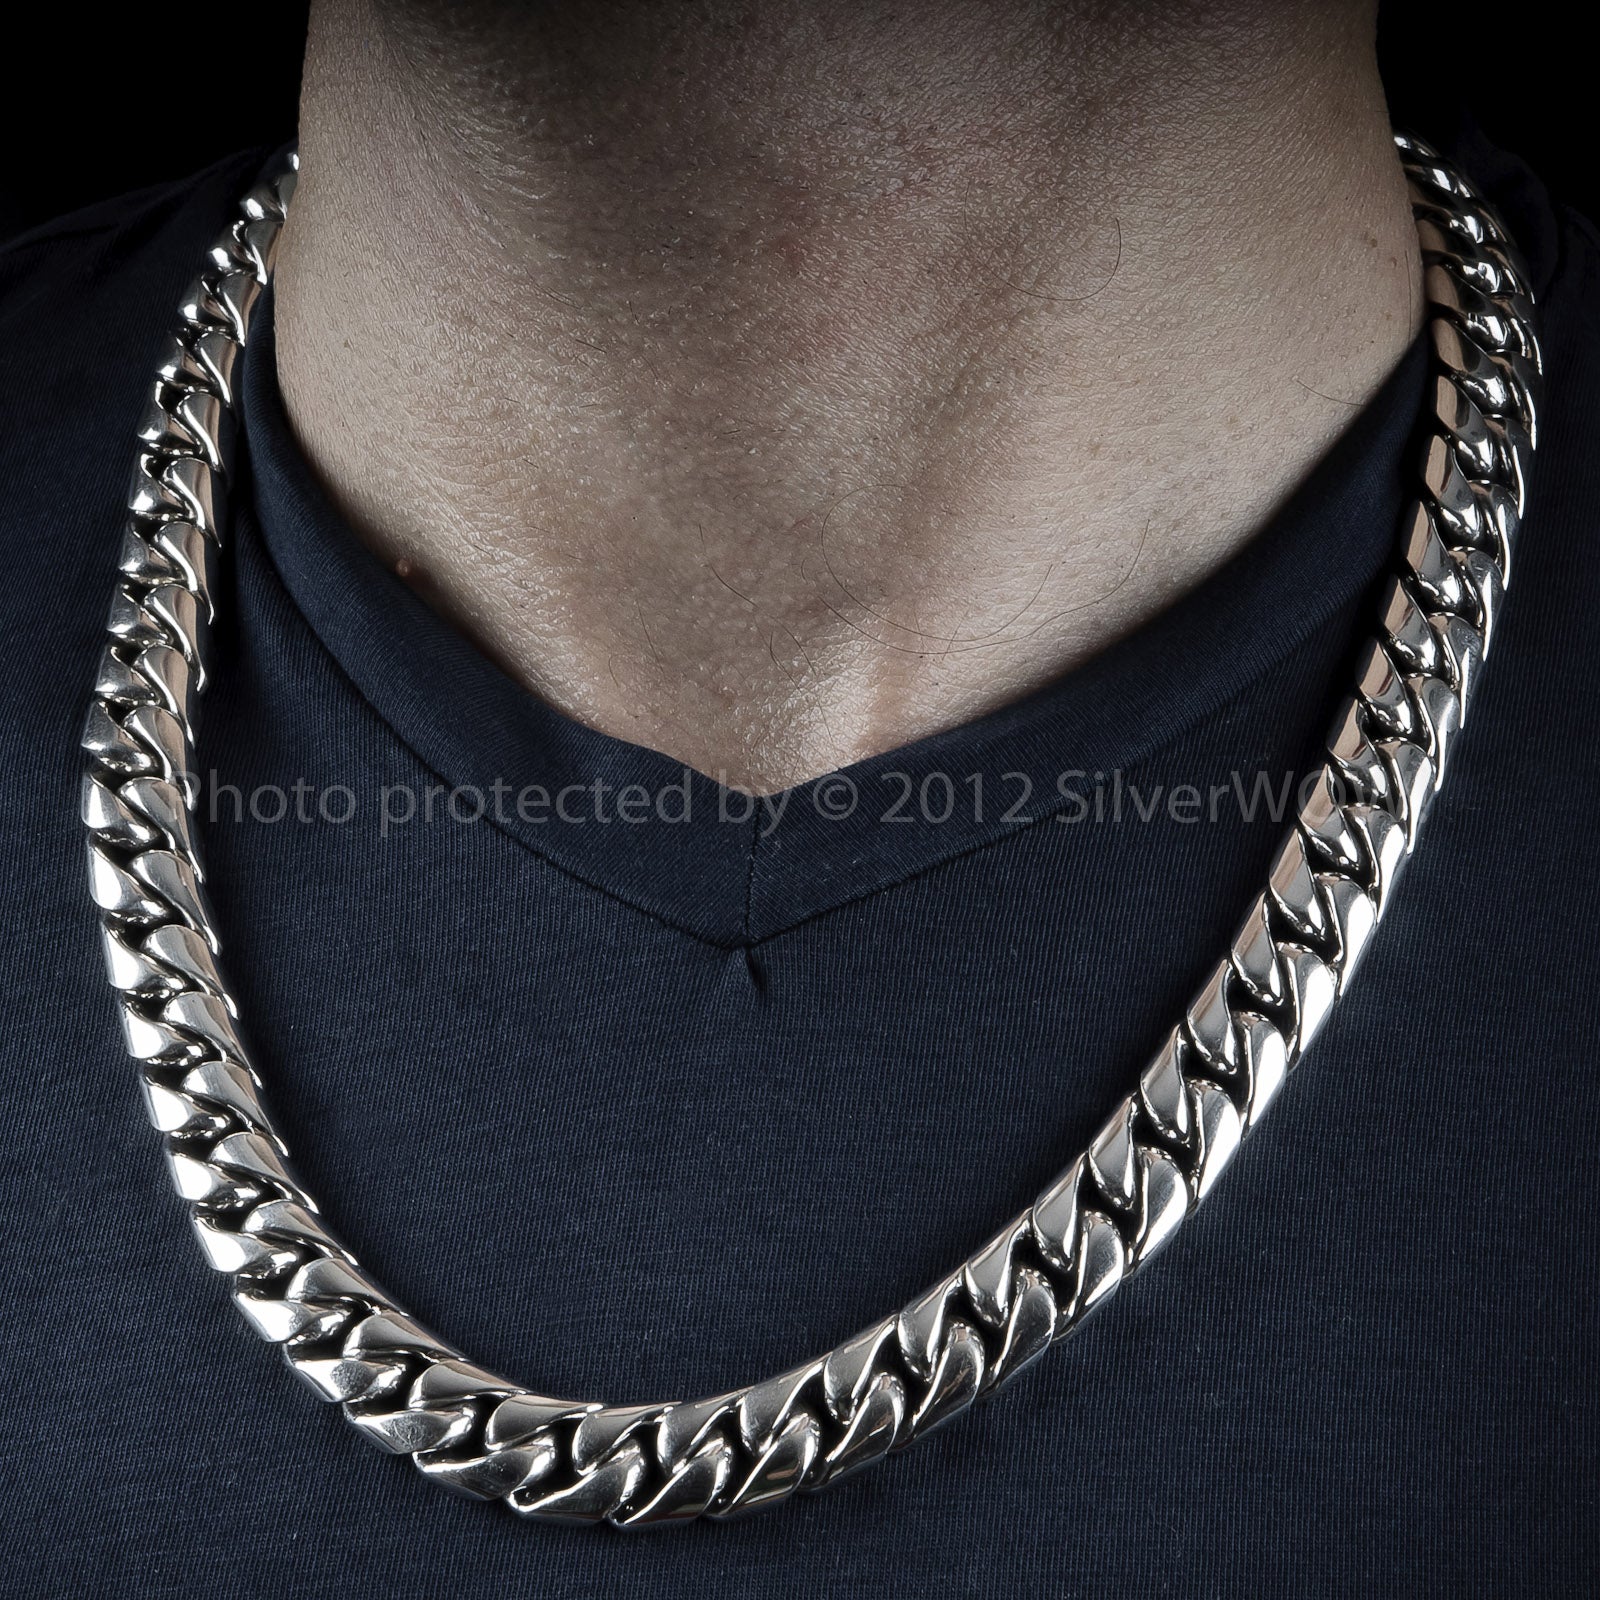 Men's Silver Chain Necklace | 4mm Width | 16, 18, 20, 22, 24 inch | CubanSkinny | Thin Chain | Mens Gift Idea January Sales